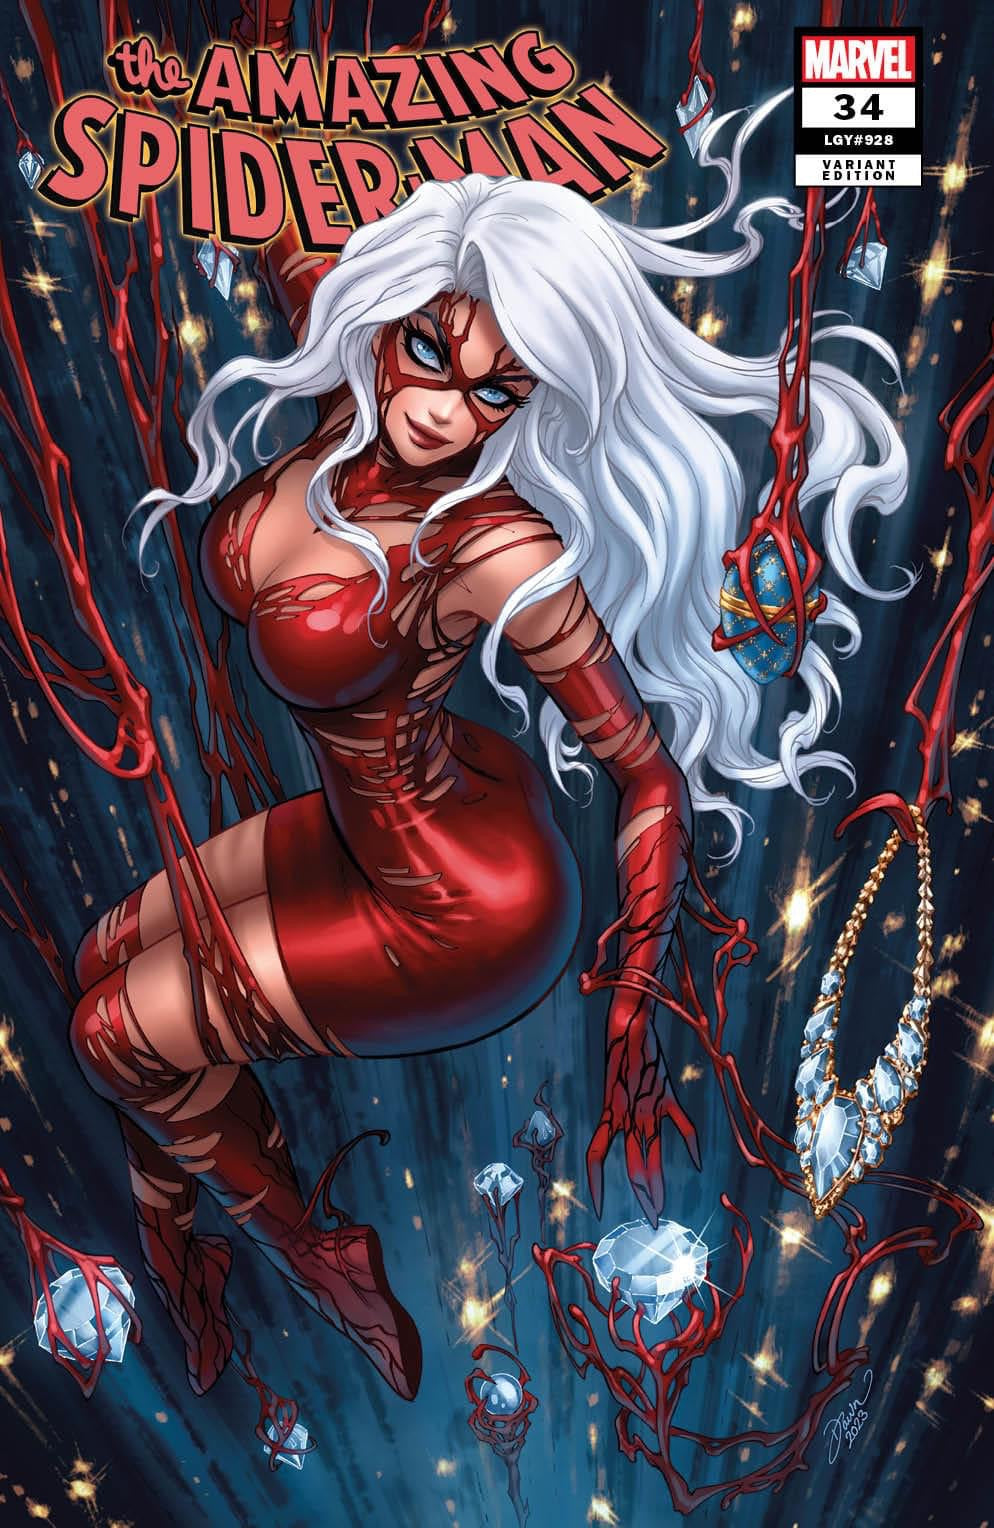 AMAZING SPIDER-MAN #34- LIMITED VARIANT by Dawn McTeigue